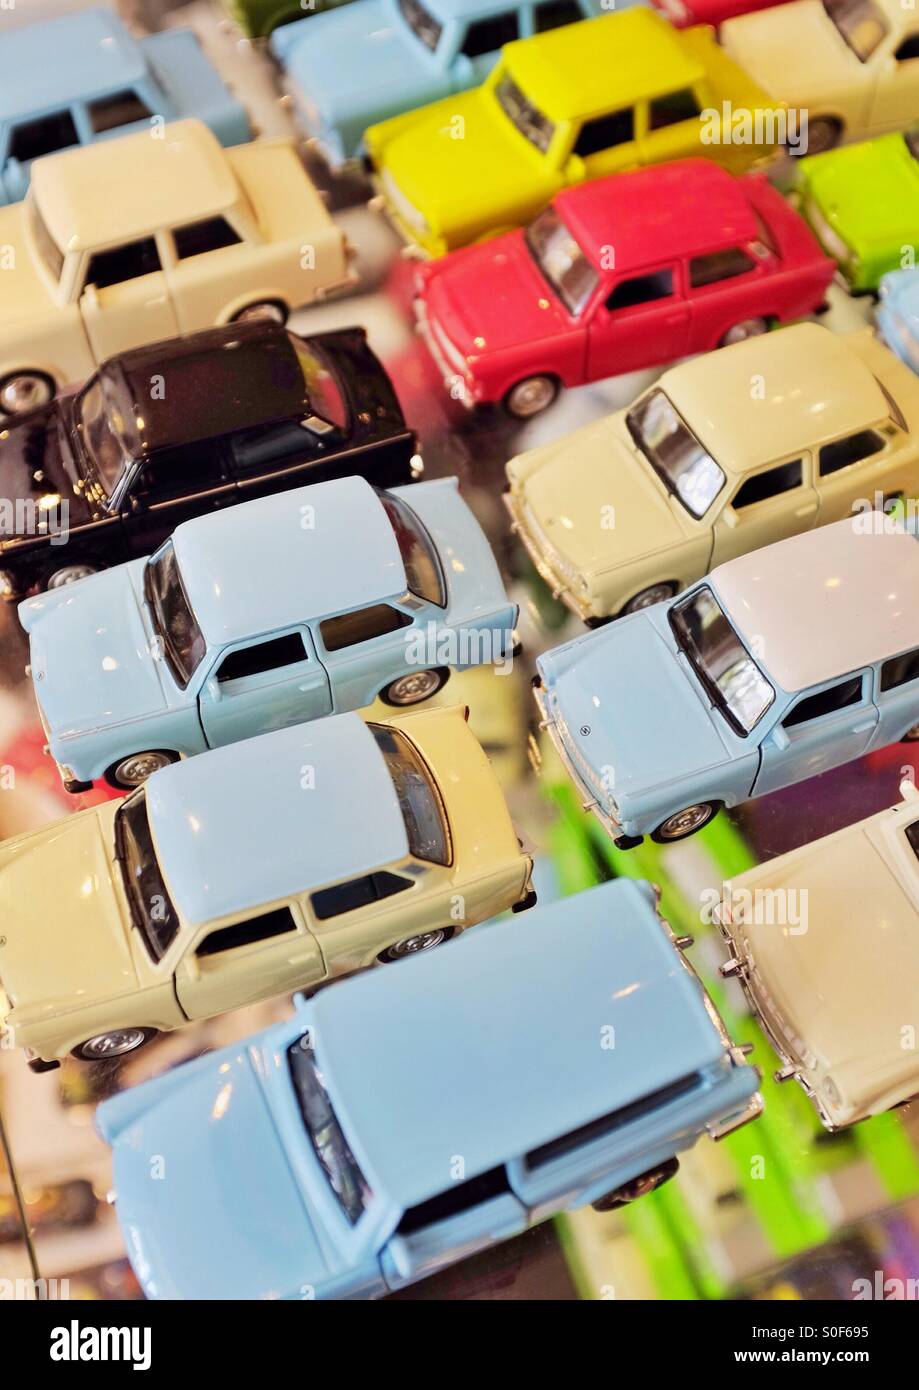 Toy car selection Stock Photo